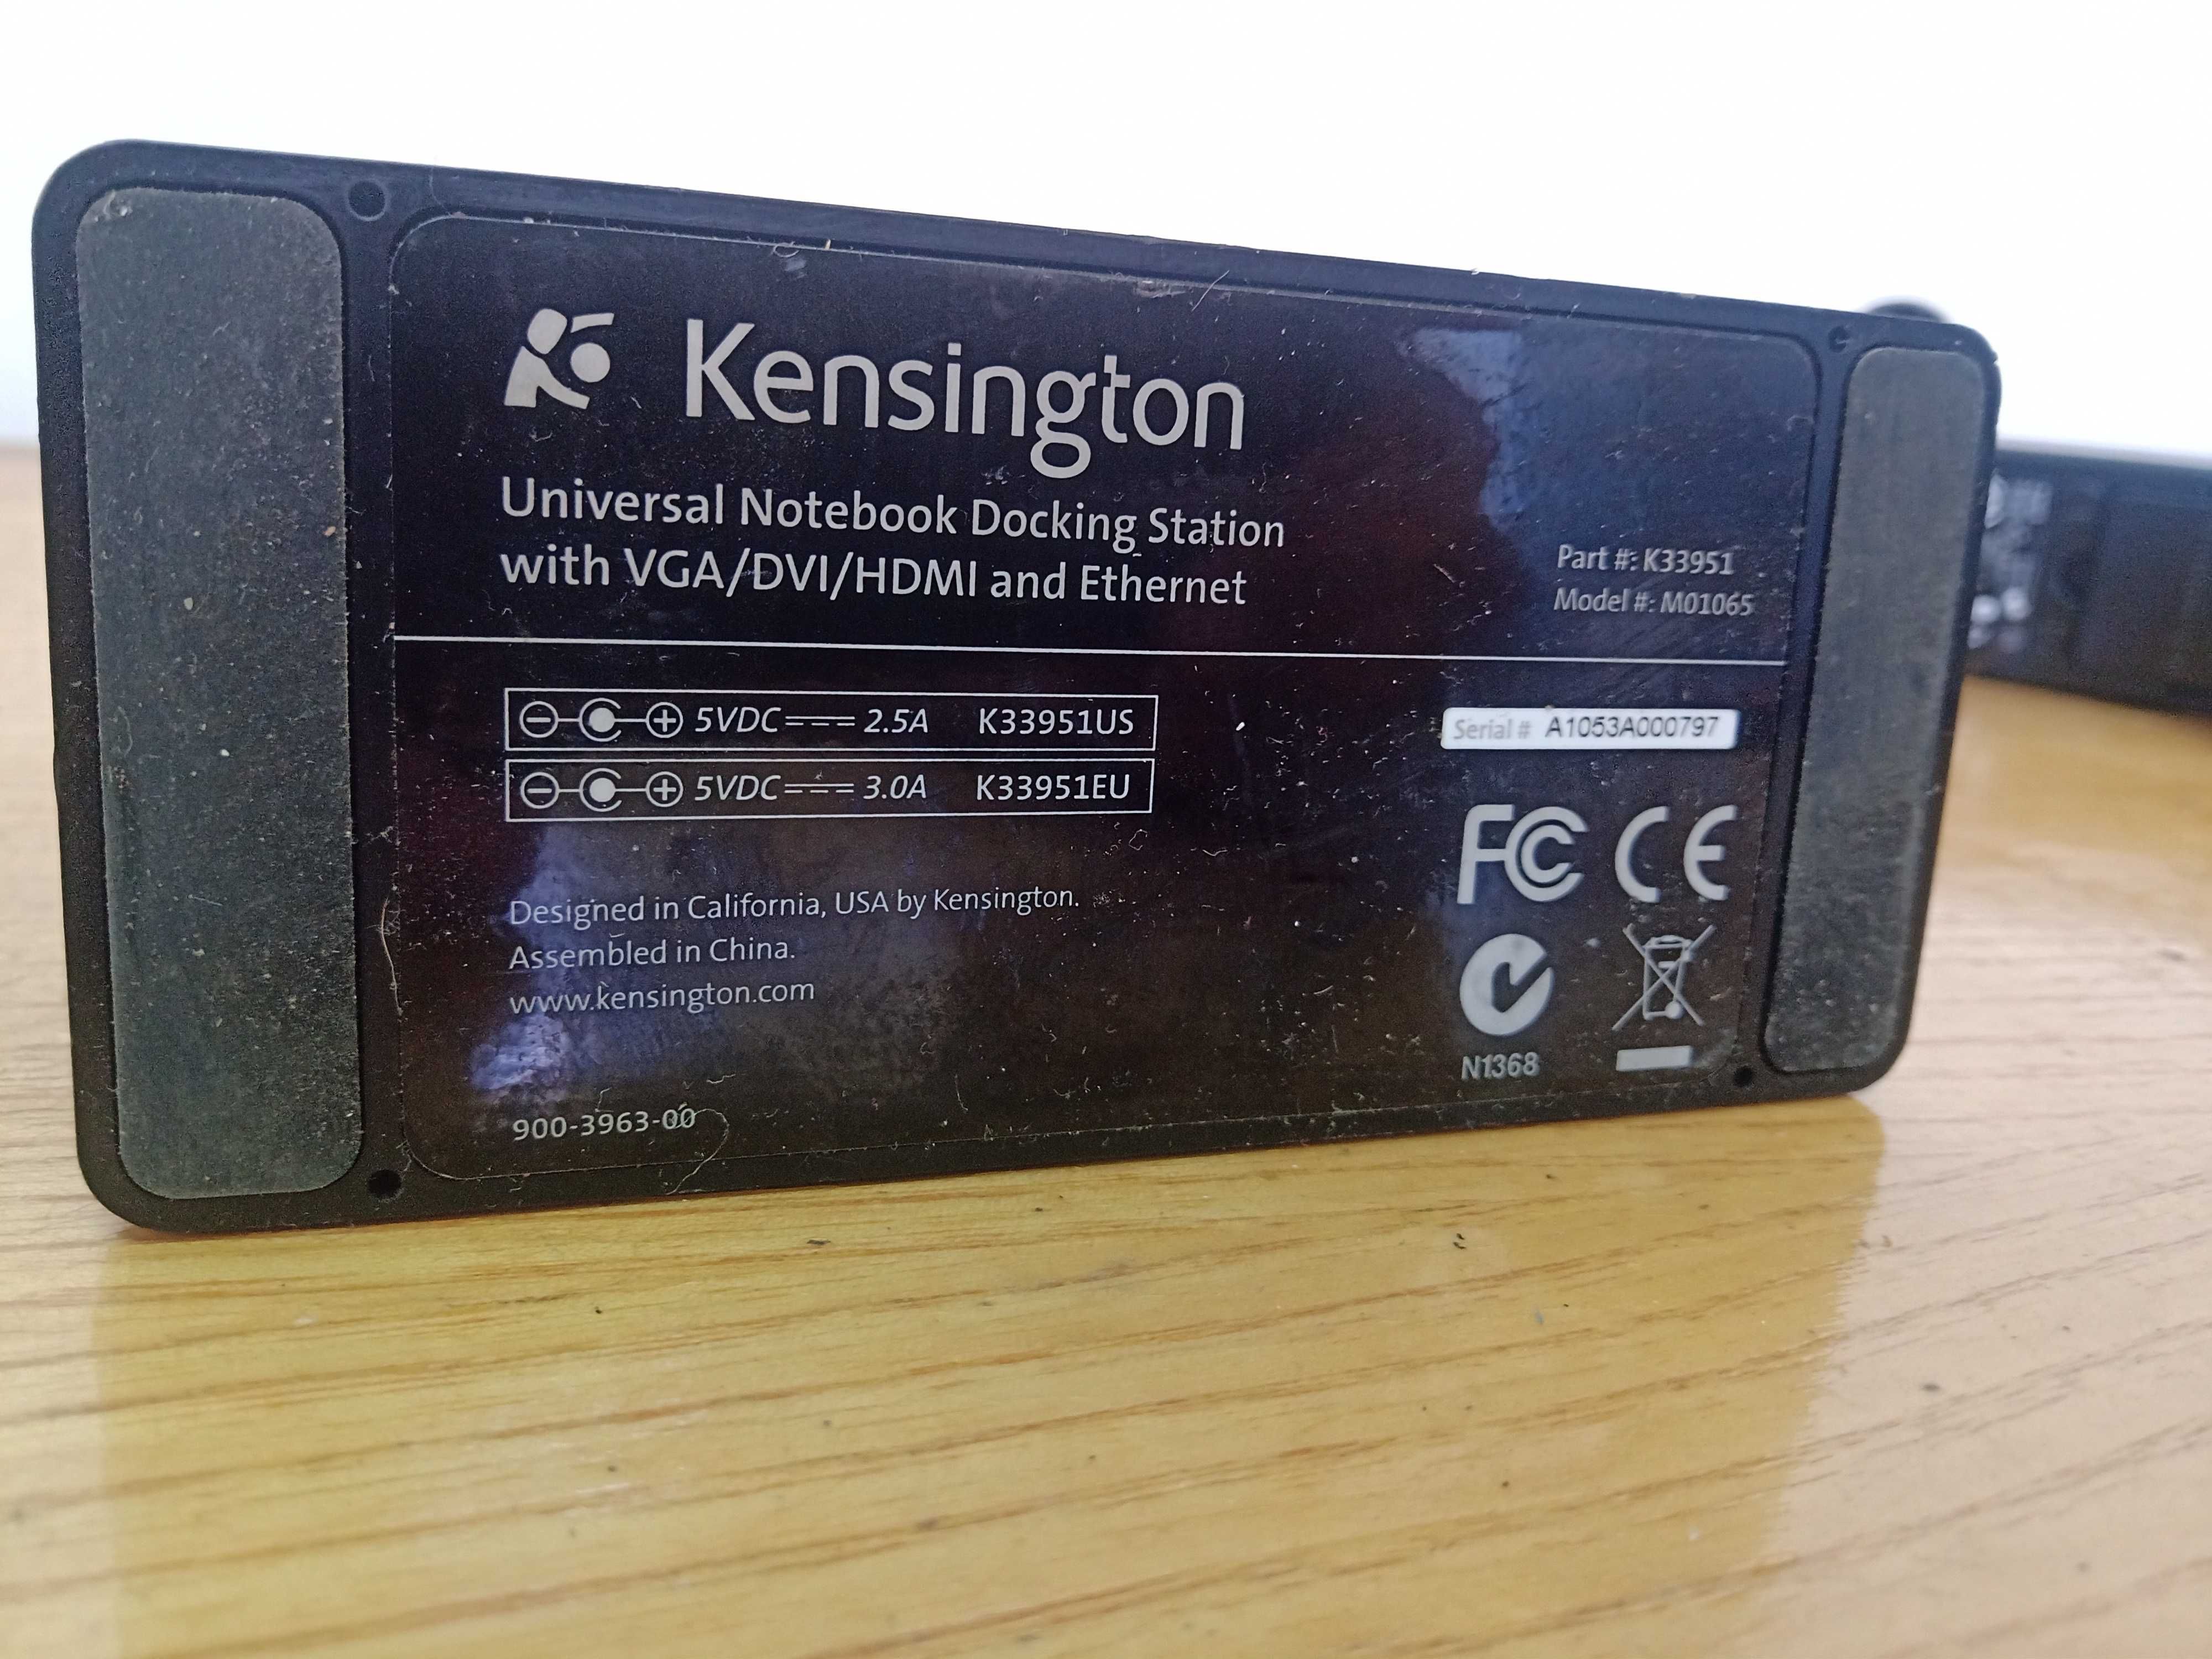 Kensington Universal Notebook Docking Station with DVI and Ethernet